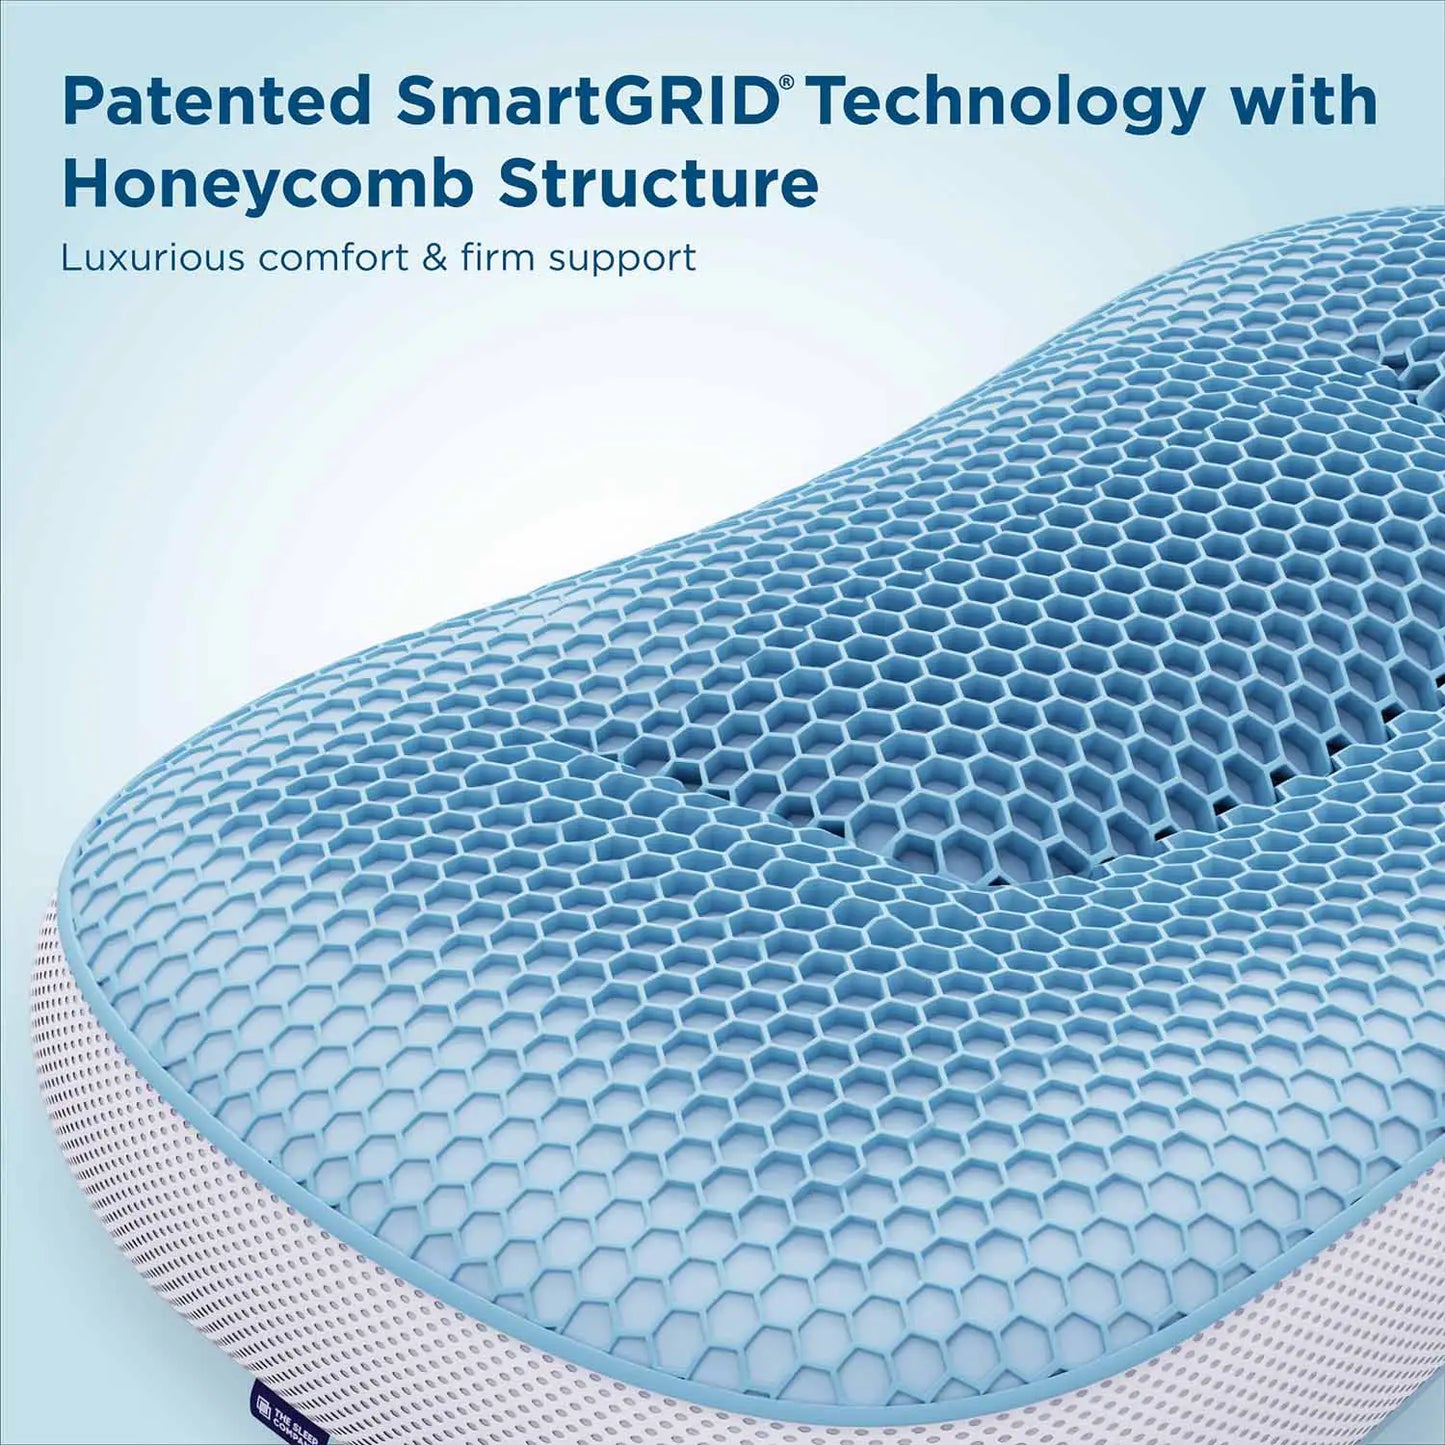 Patented SmartGrid Technology with Honeycomb Structure 